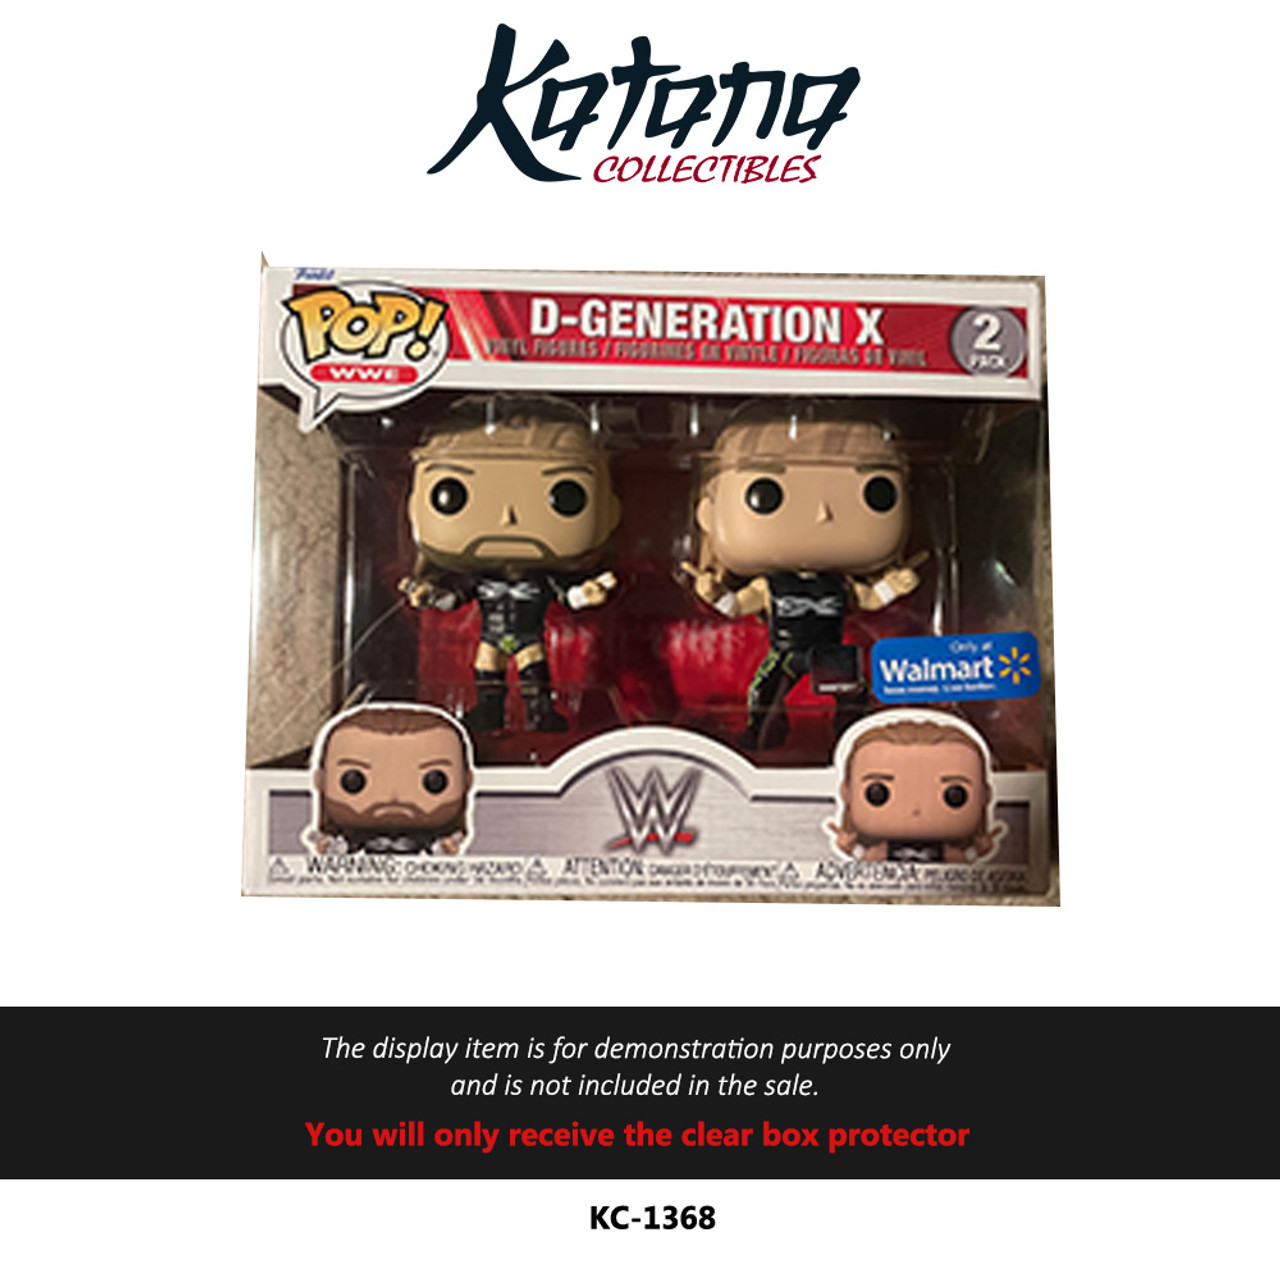 Katana Collectibles Protector For Funko Pop Deluxe 2 Pack WWE D-Generation X Walmart Exclusive